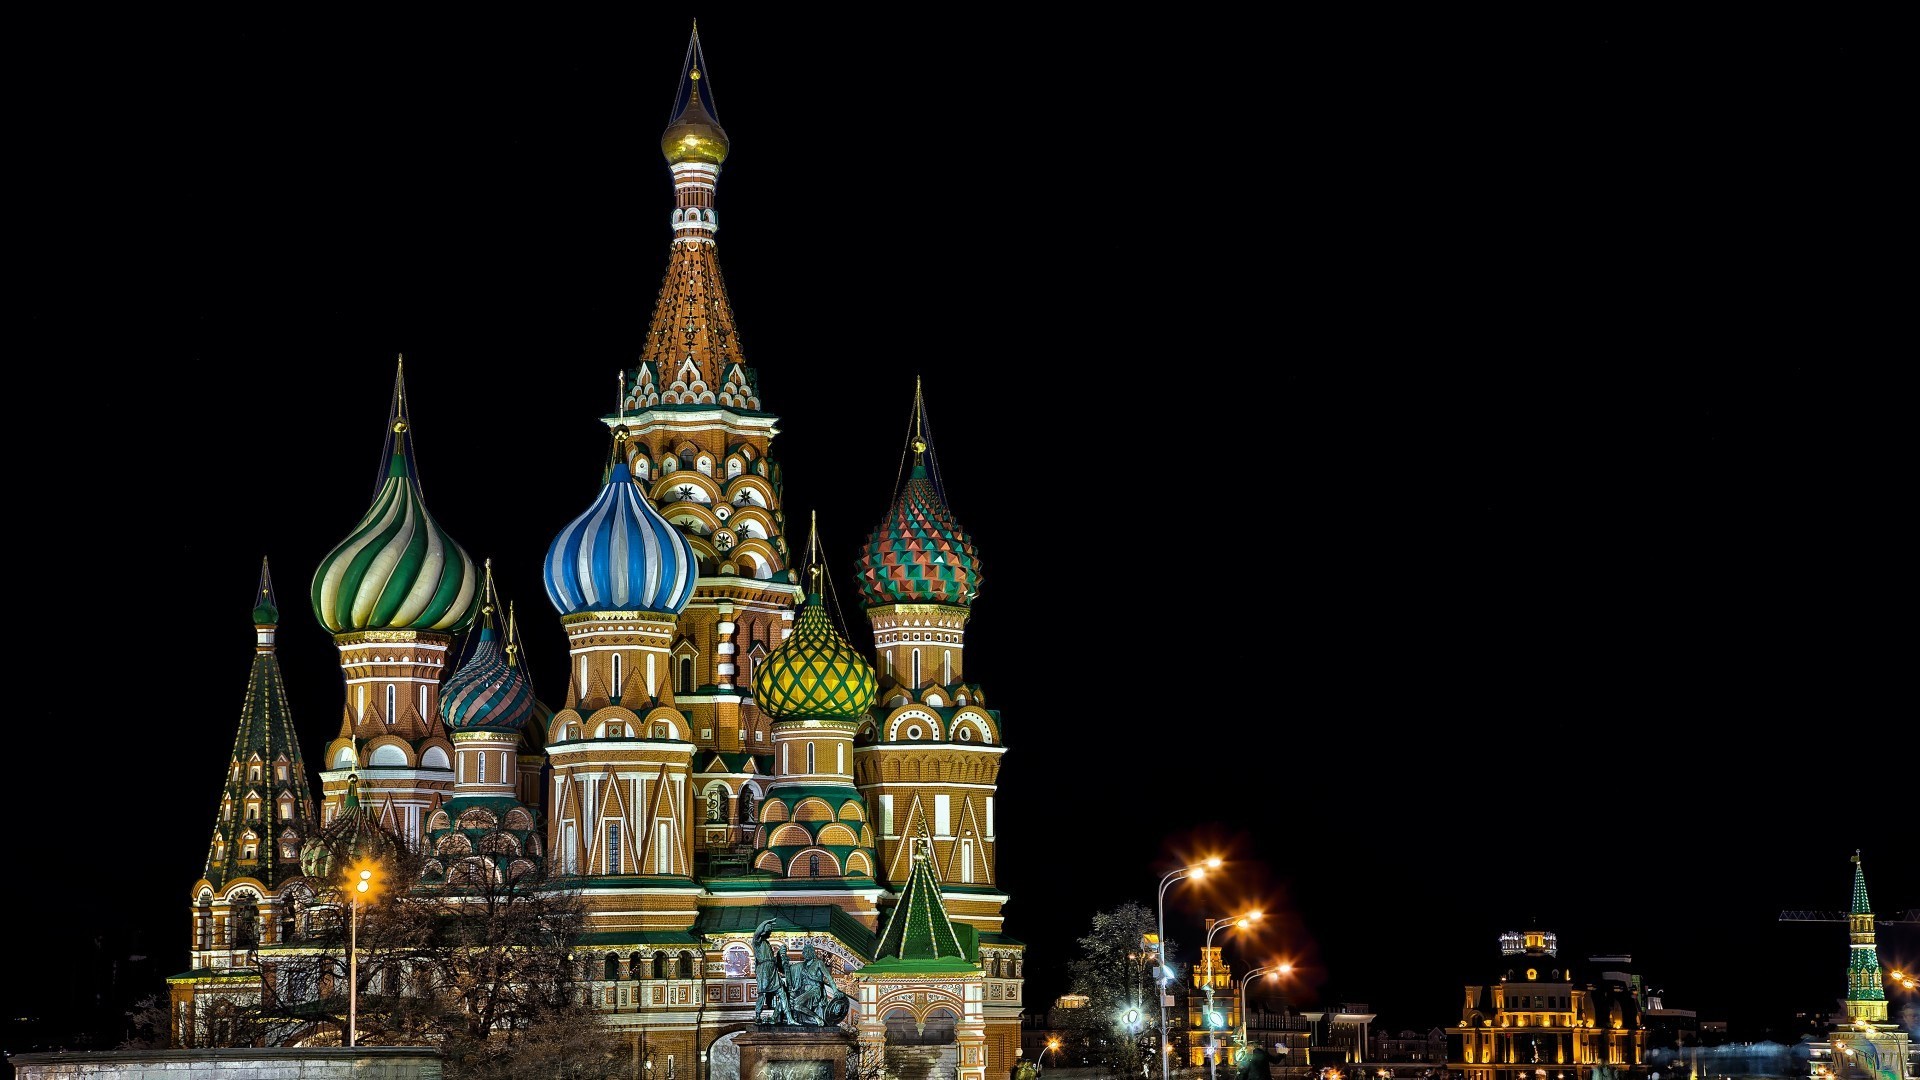 General 1920x1080 architecture city cityscape night lights building Moscow Russia Saint Basil's Cathedral tower street light sculpture capital trees landmark